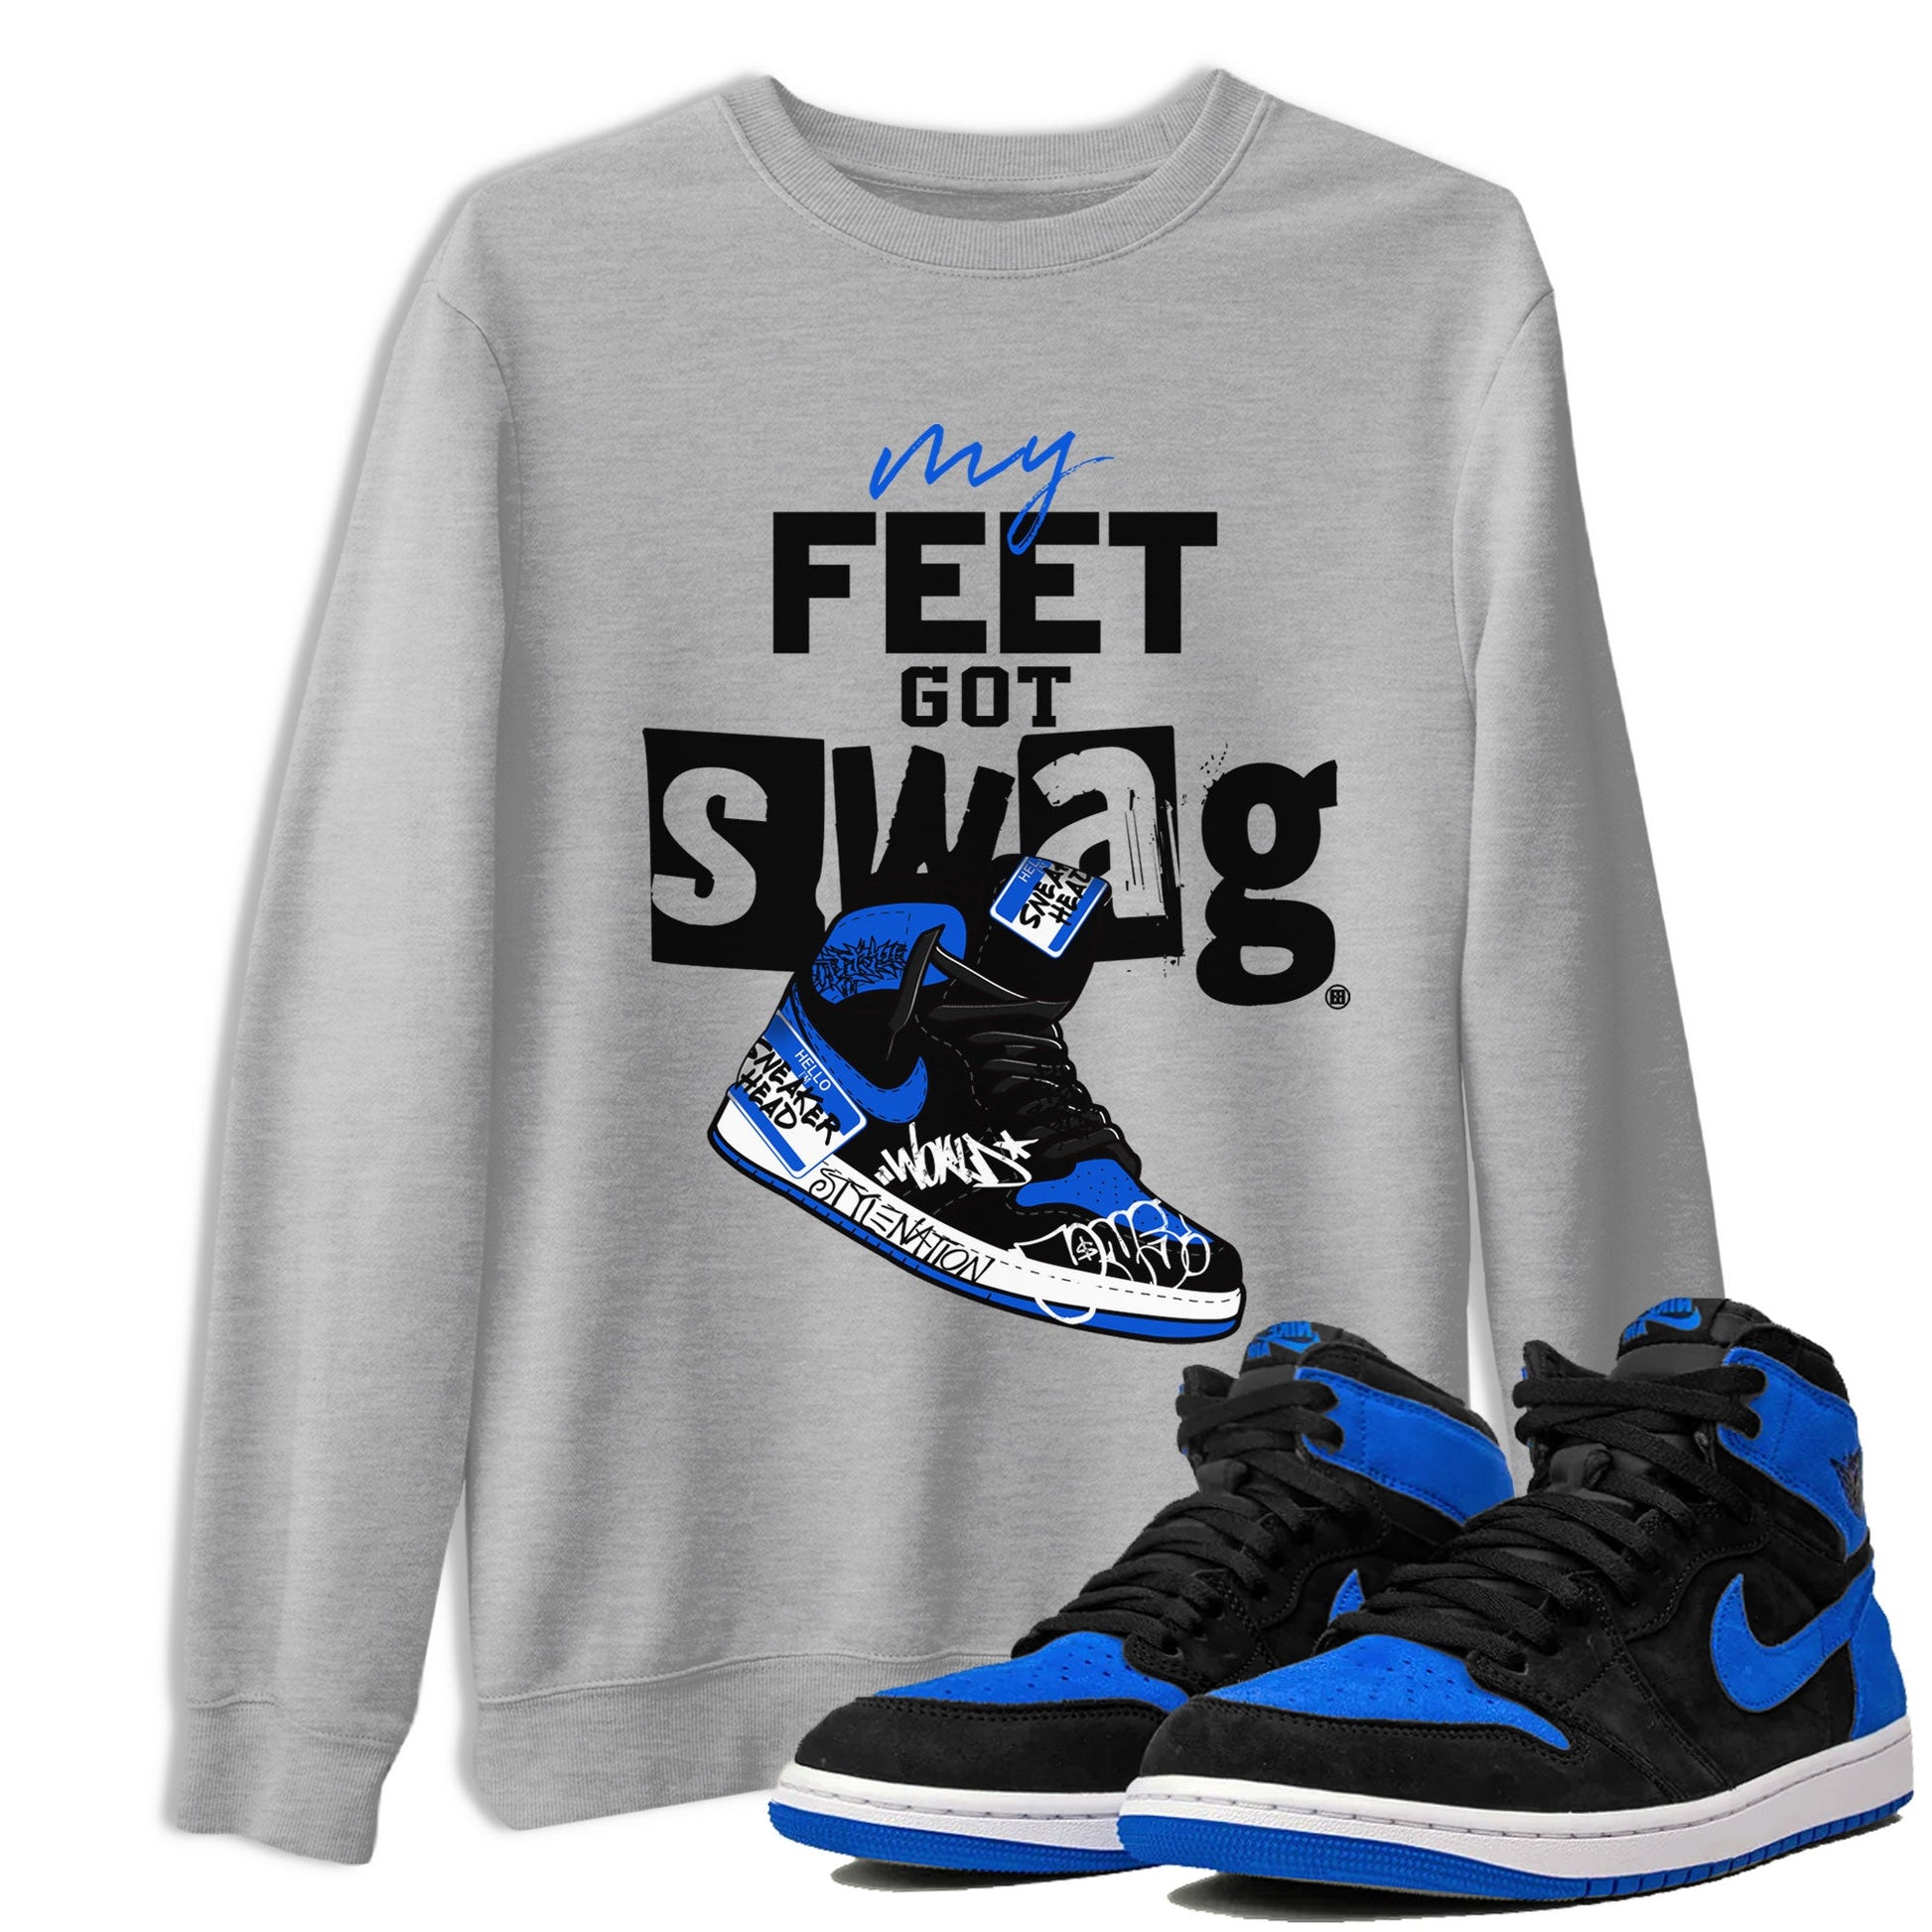 Pin by Anthony on shoes/sneakers  Disney shoes, Jordan swag, Swag men